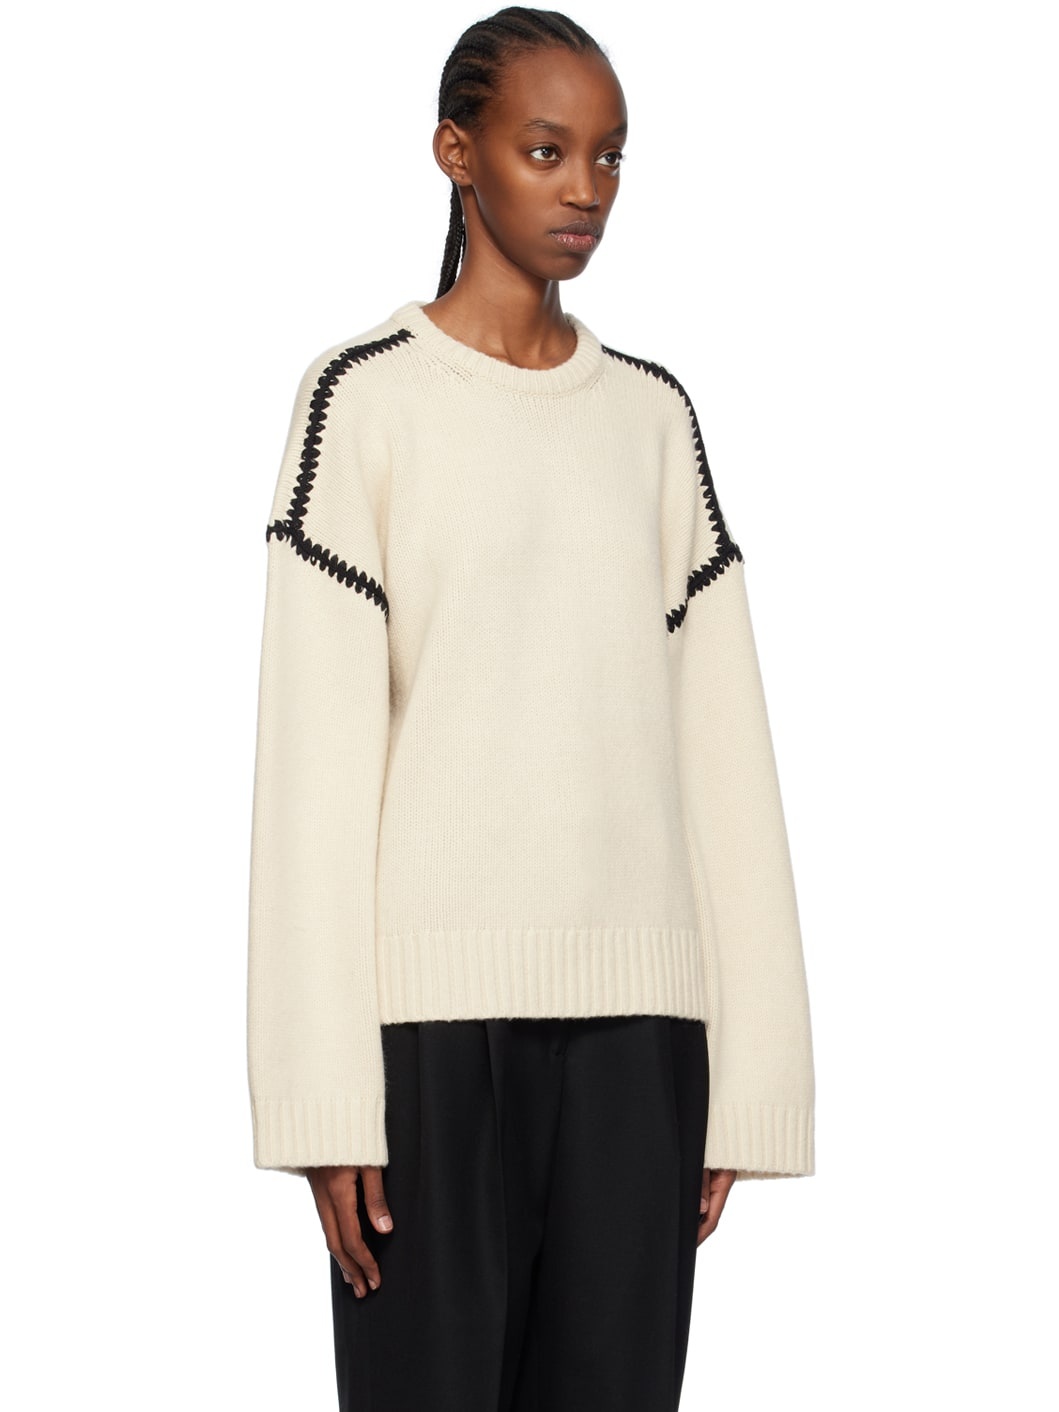 Off-White Embroidered Sweater - 2